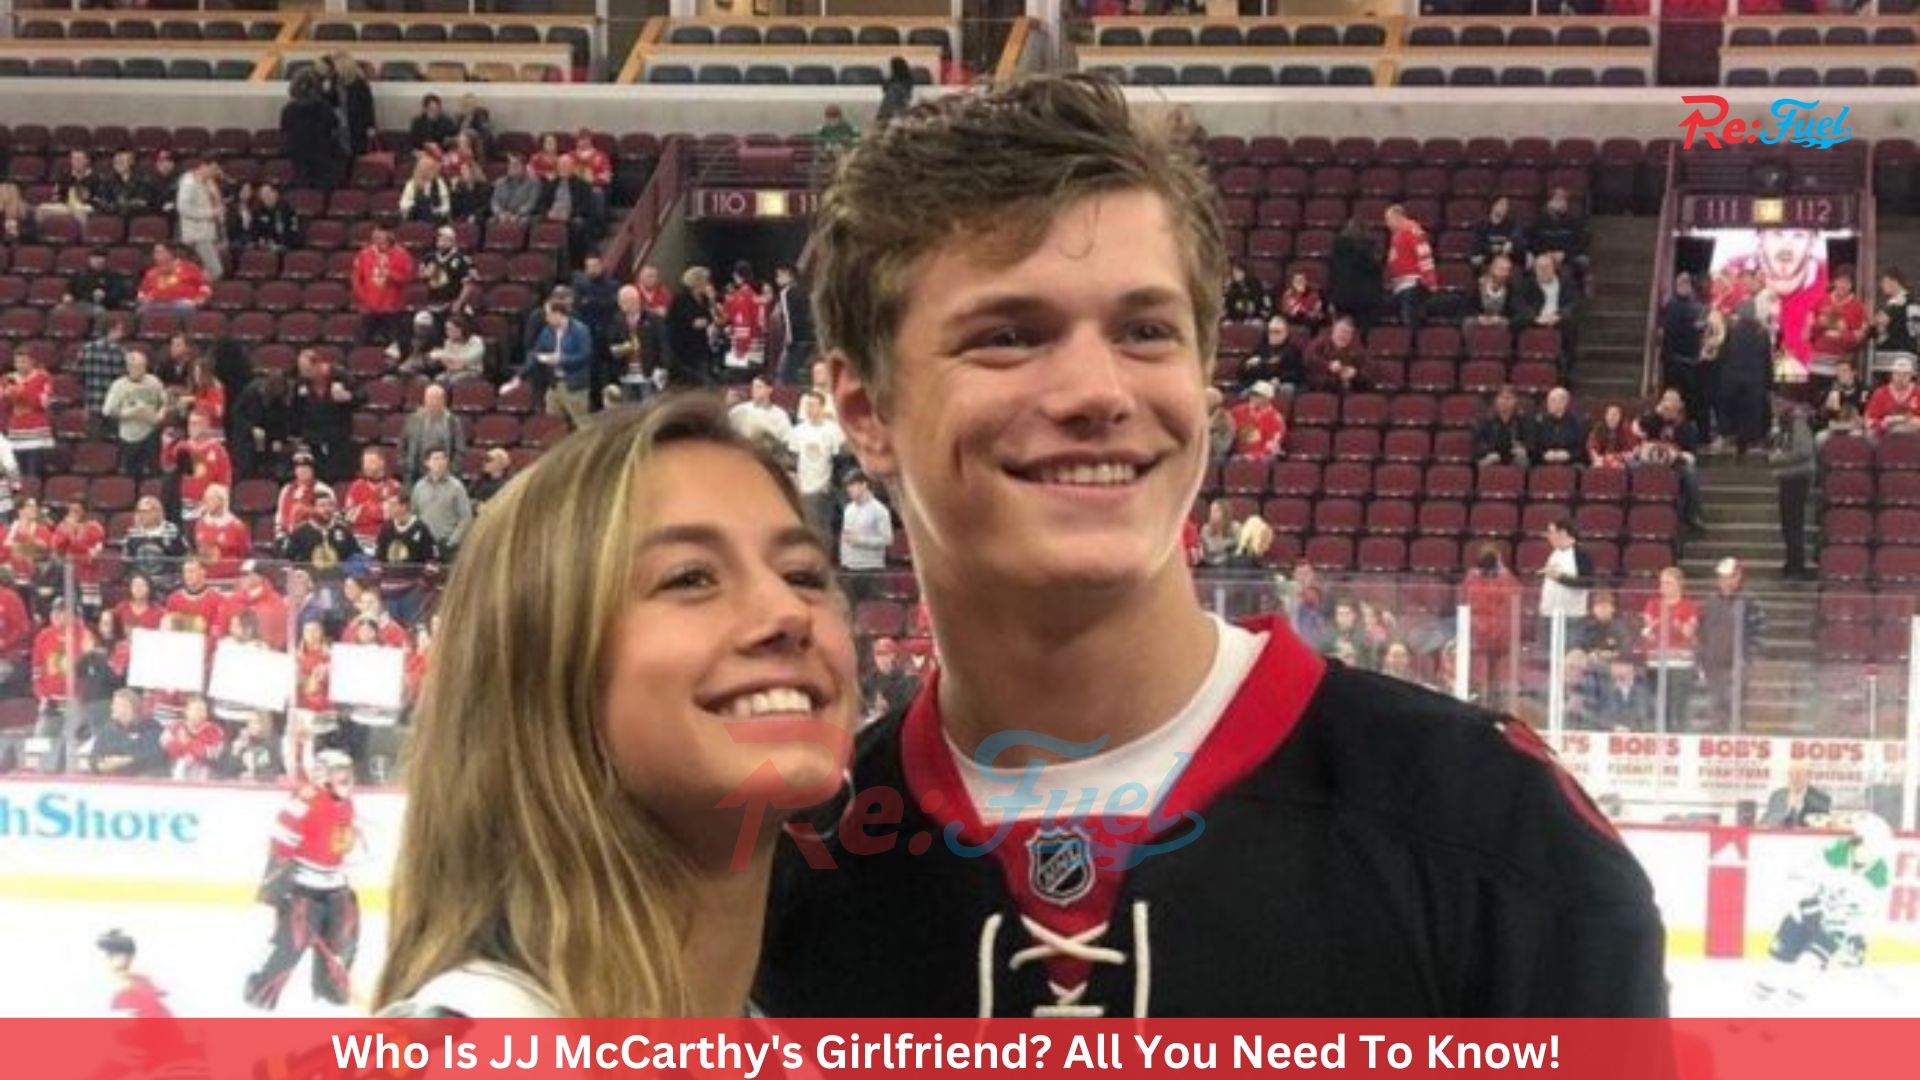 Who Is JJ McCarthy's Girlfriend? All You Need To Know!